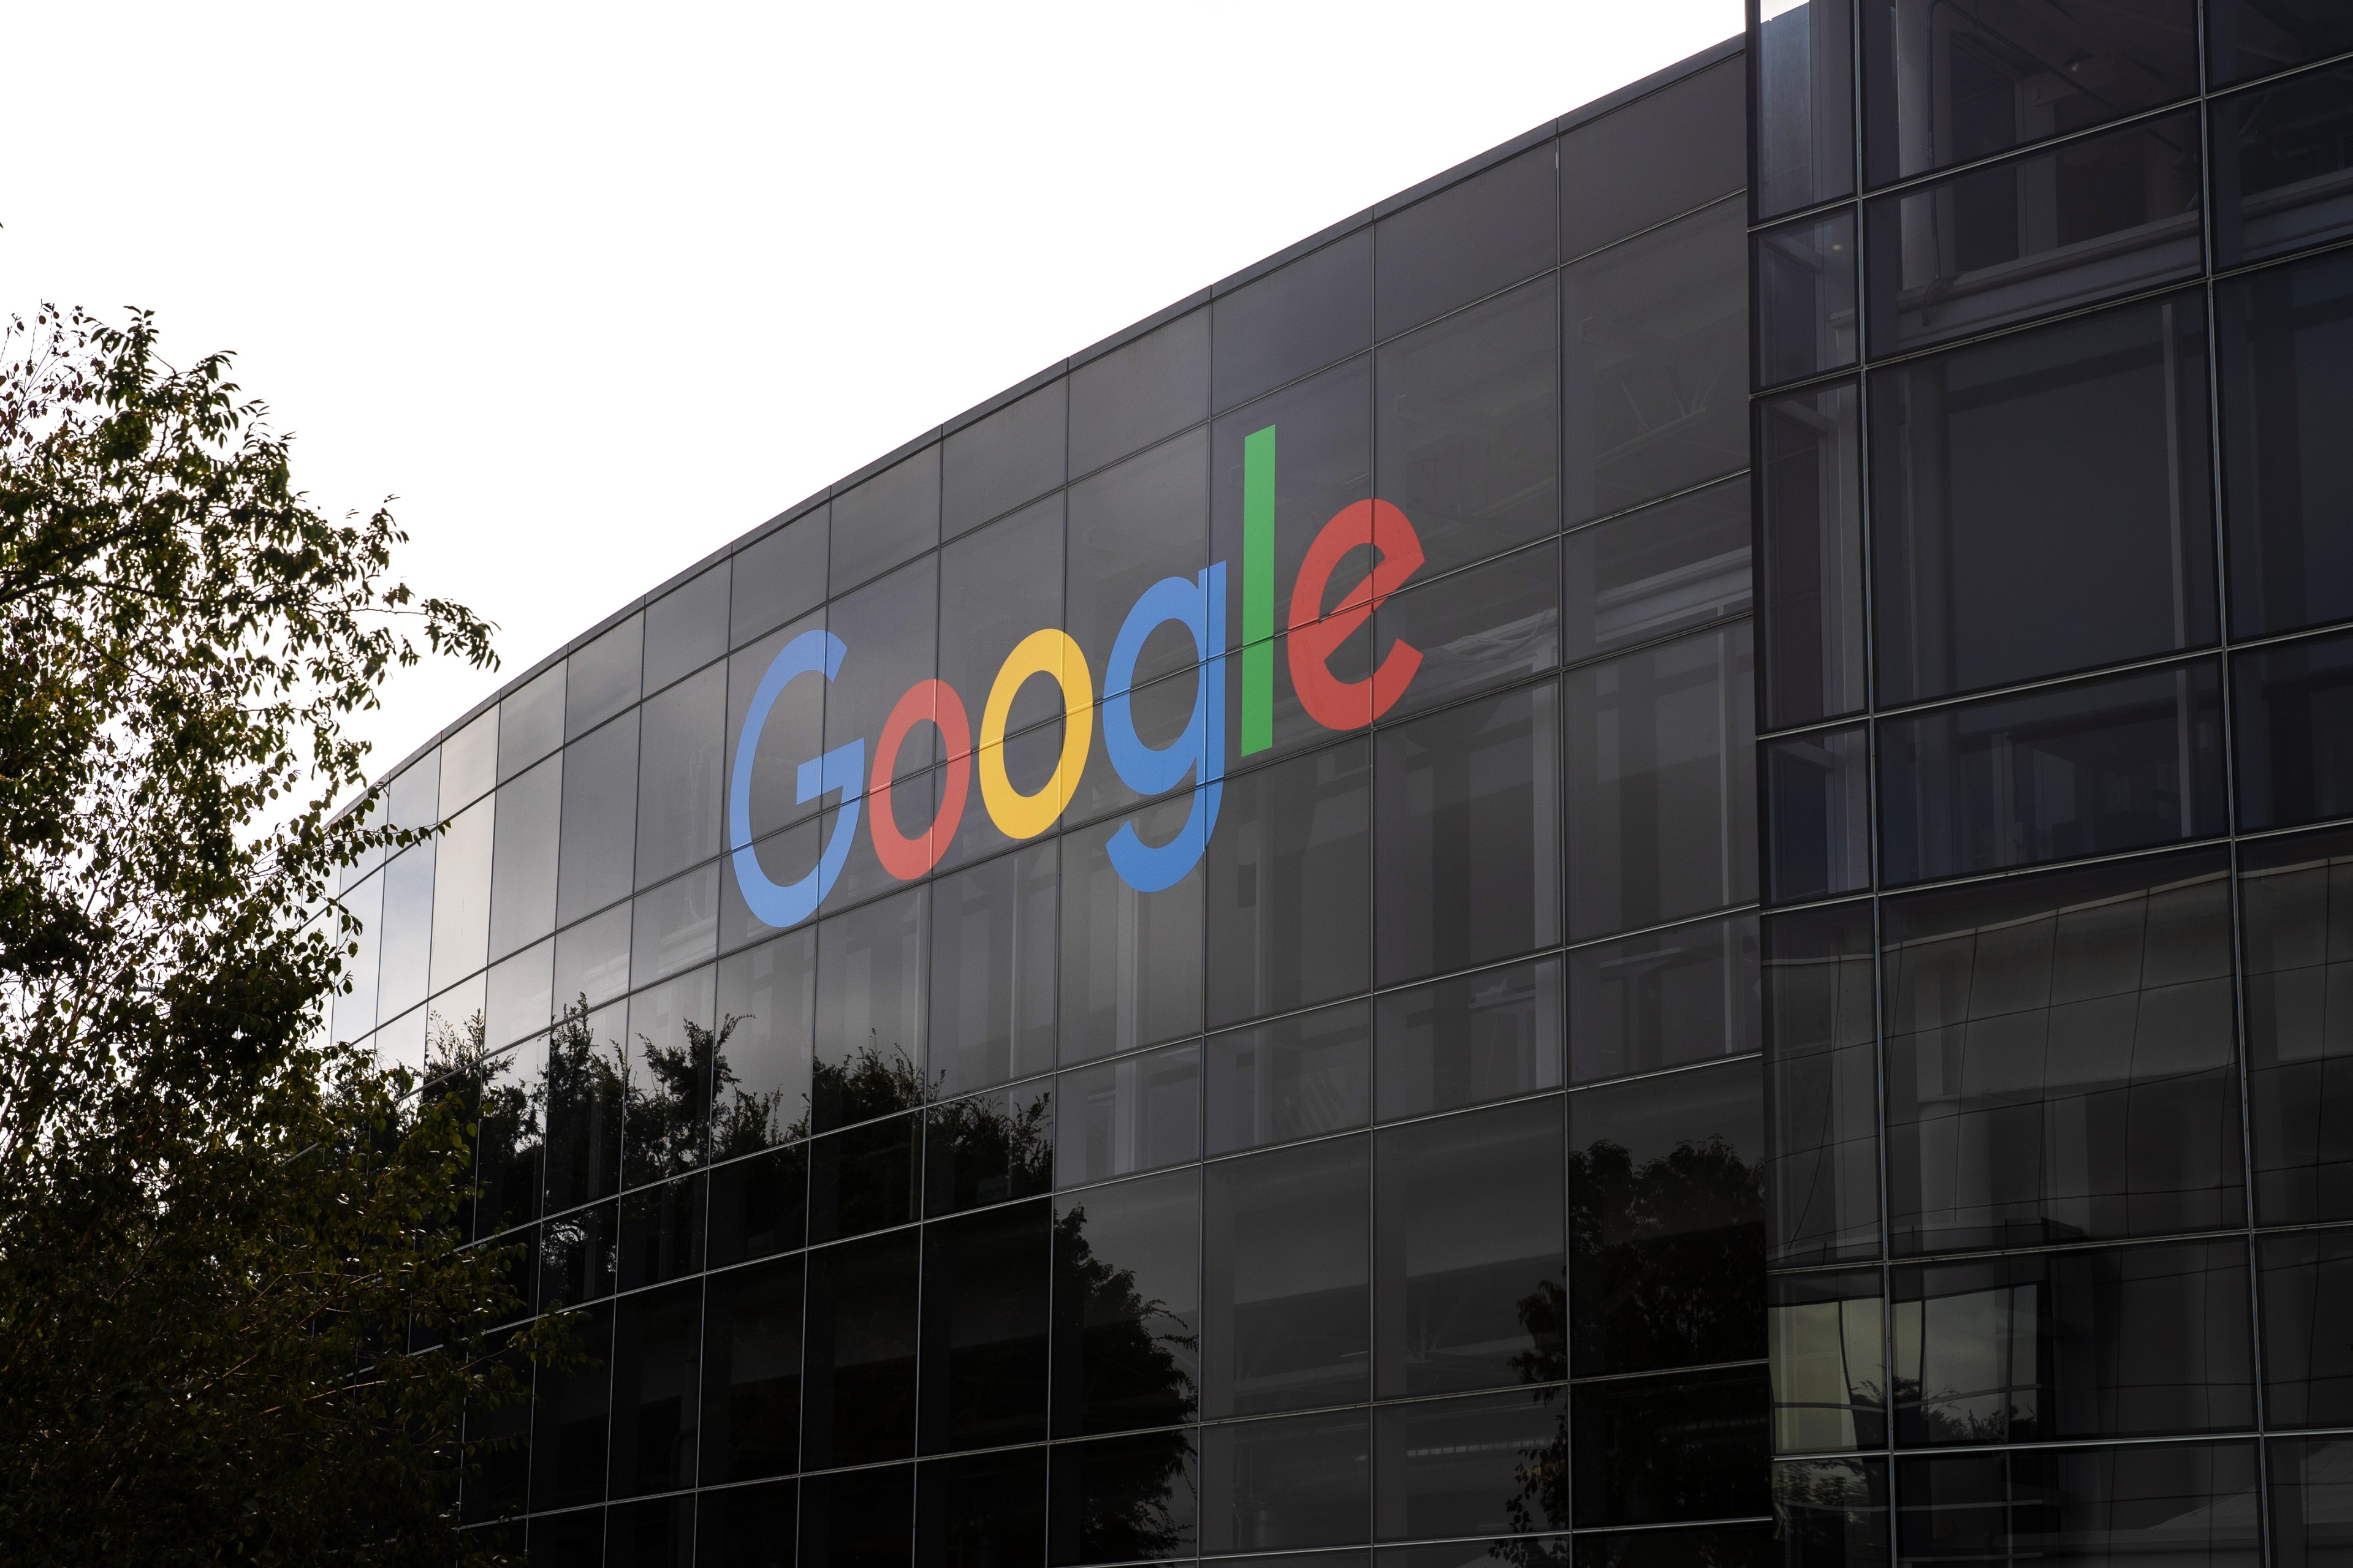 A Google logo in colorful letters on a glass-walled building, with trees nearby.